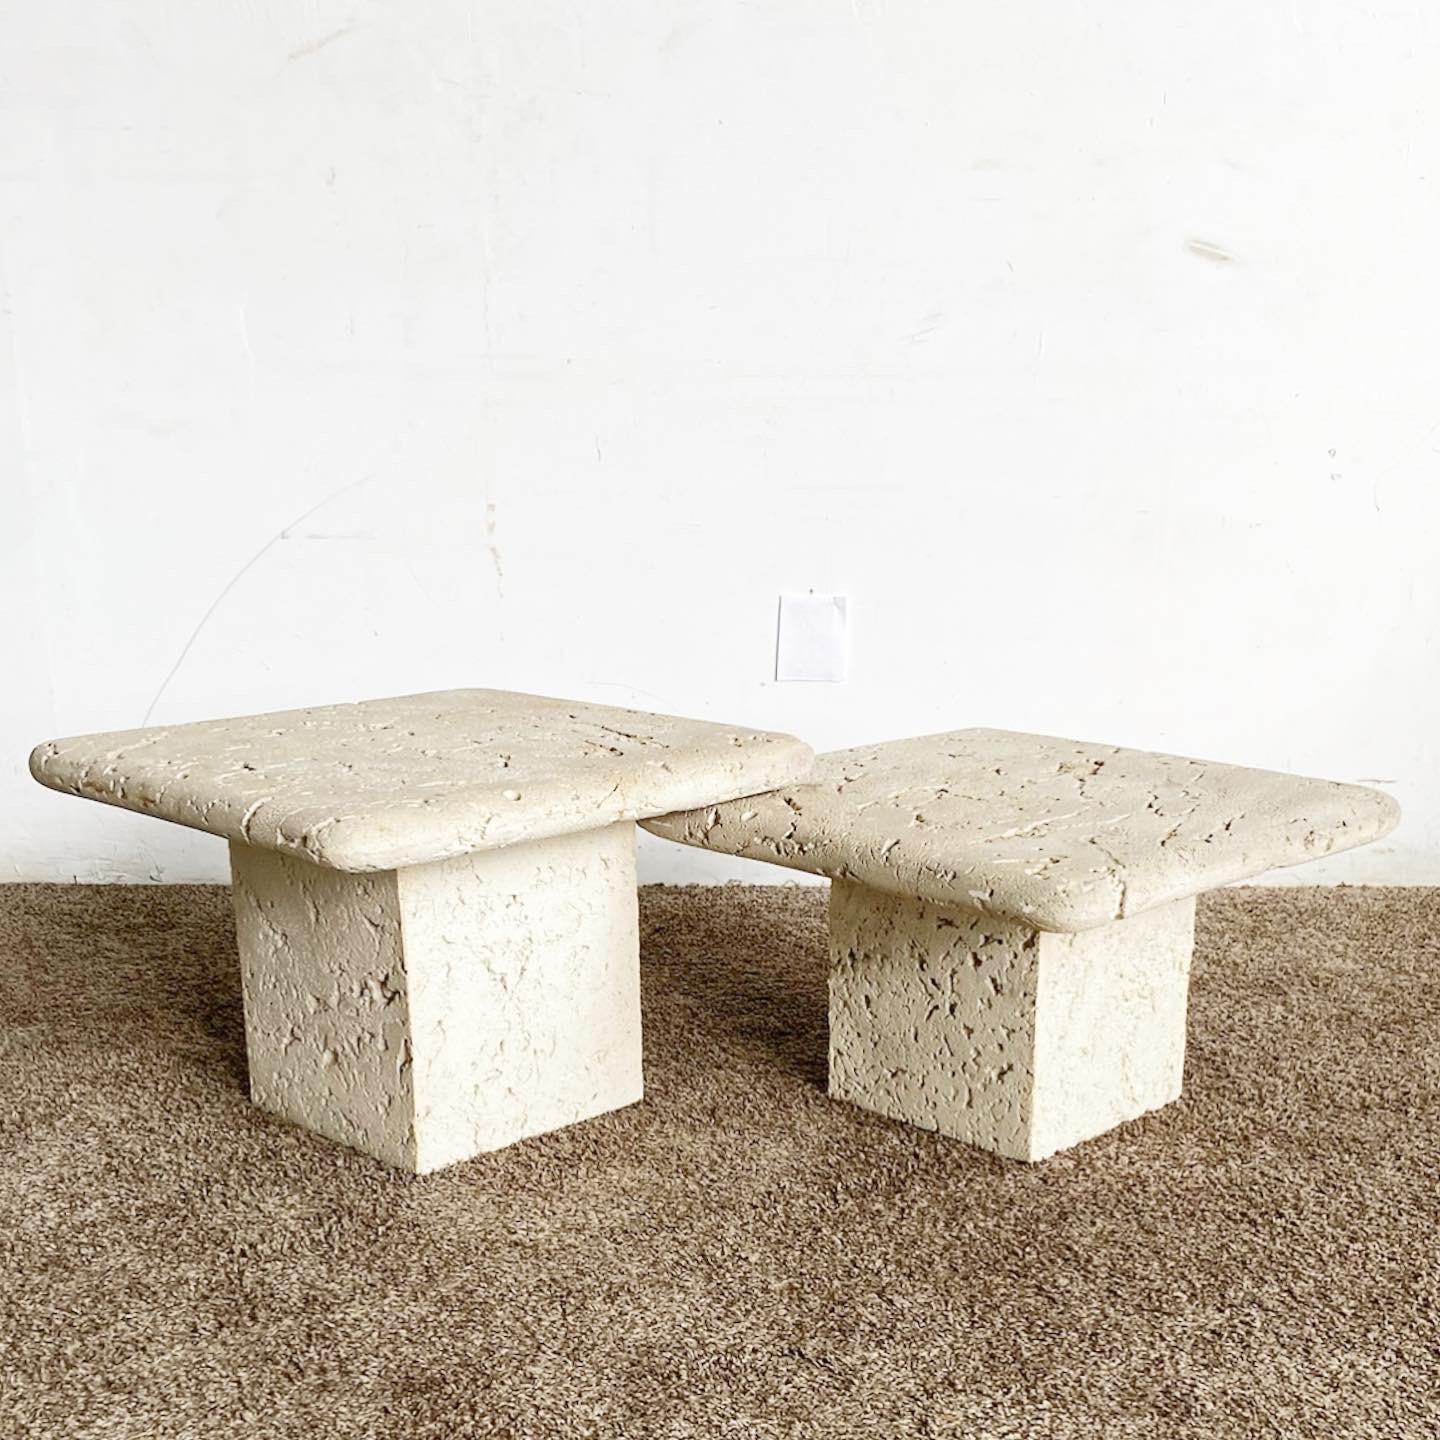 Elevate your d√©cor with these Faux Coquina Coral Cast Cement Square Top Mushroom Nesting Tables. A harmonious blend of organic allure and functional design.

Material: Crafted from cast cement with a faux coquina coral finish
Design: Square top